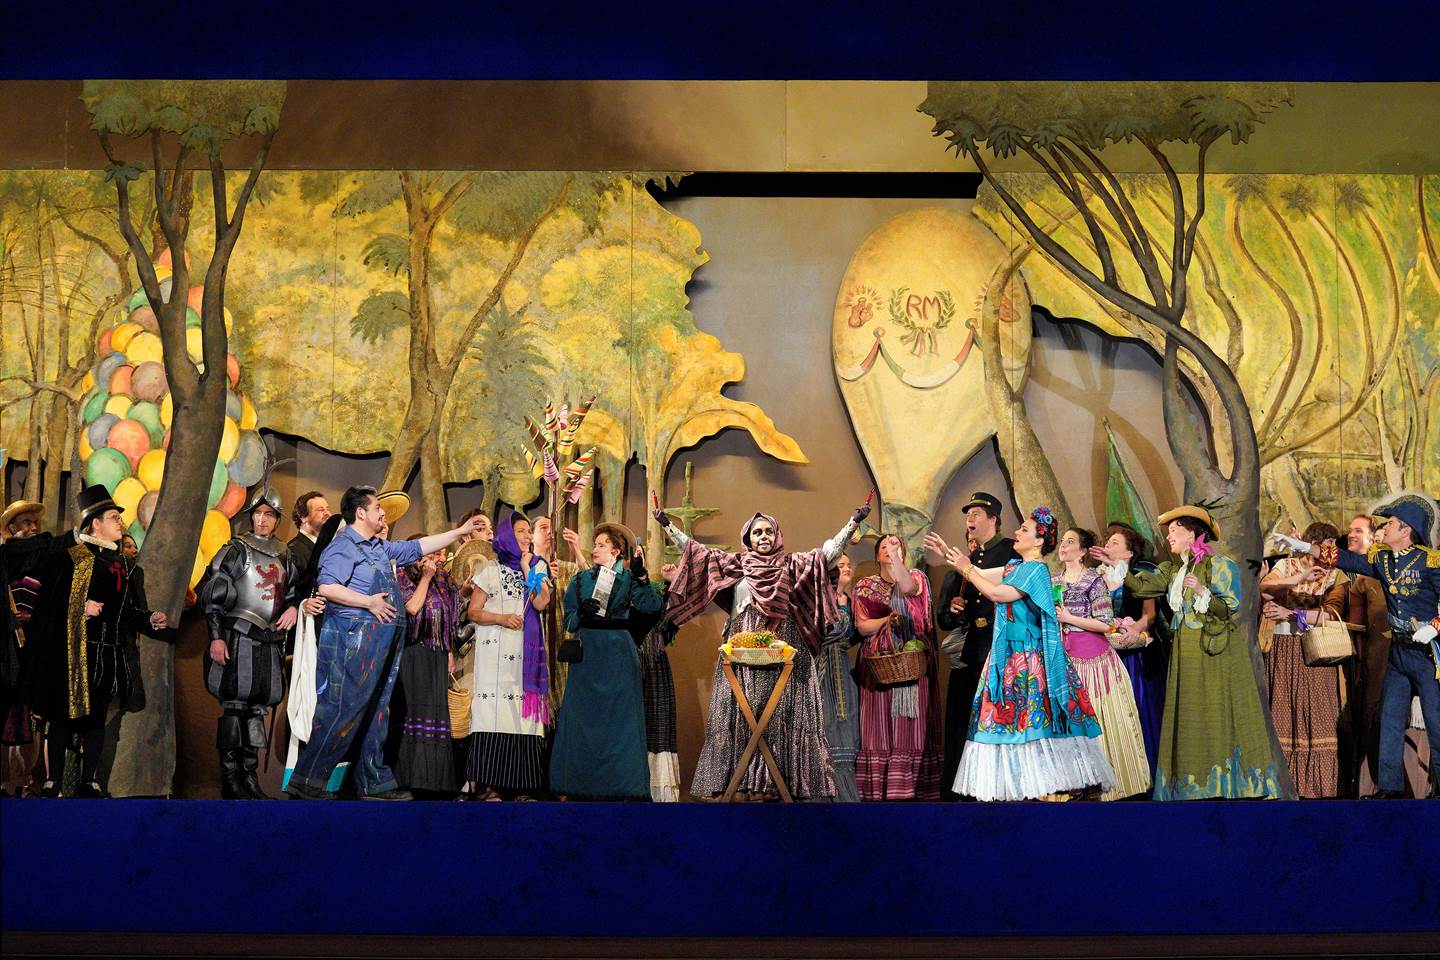 Scene from Frida A group of people standing on stage in front of a painting of forest with a person in skeleton costume at the center